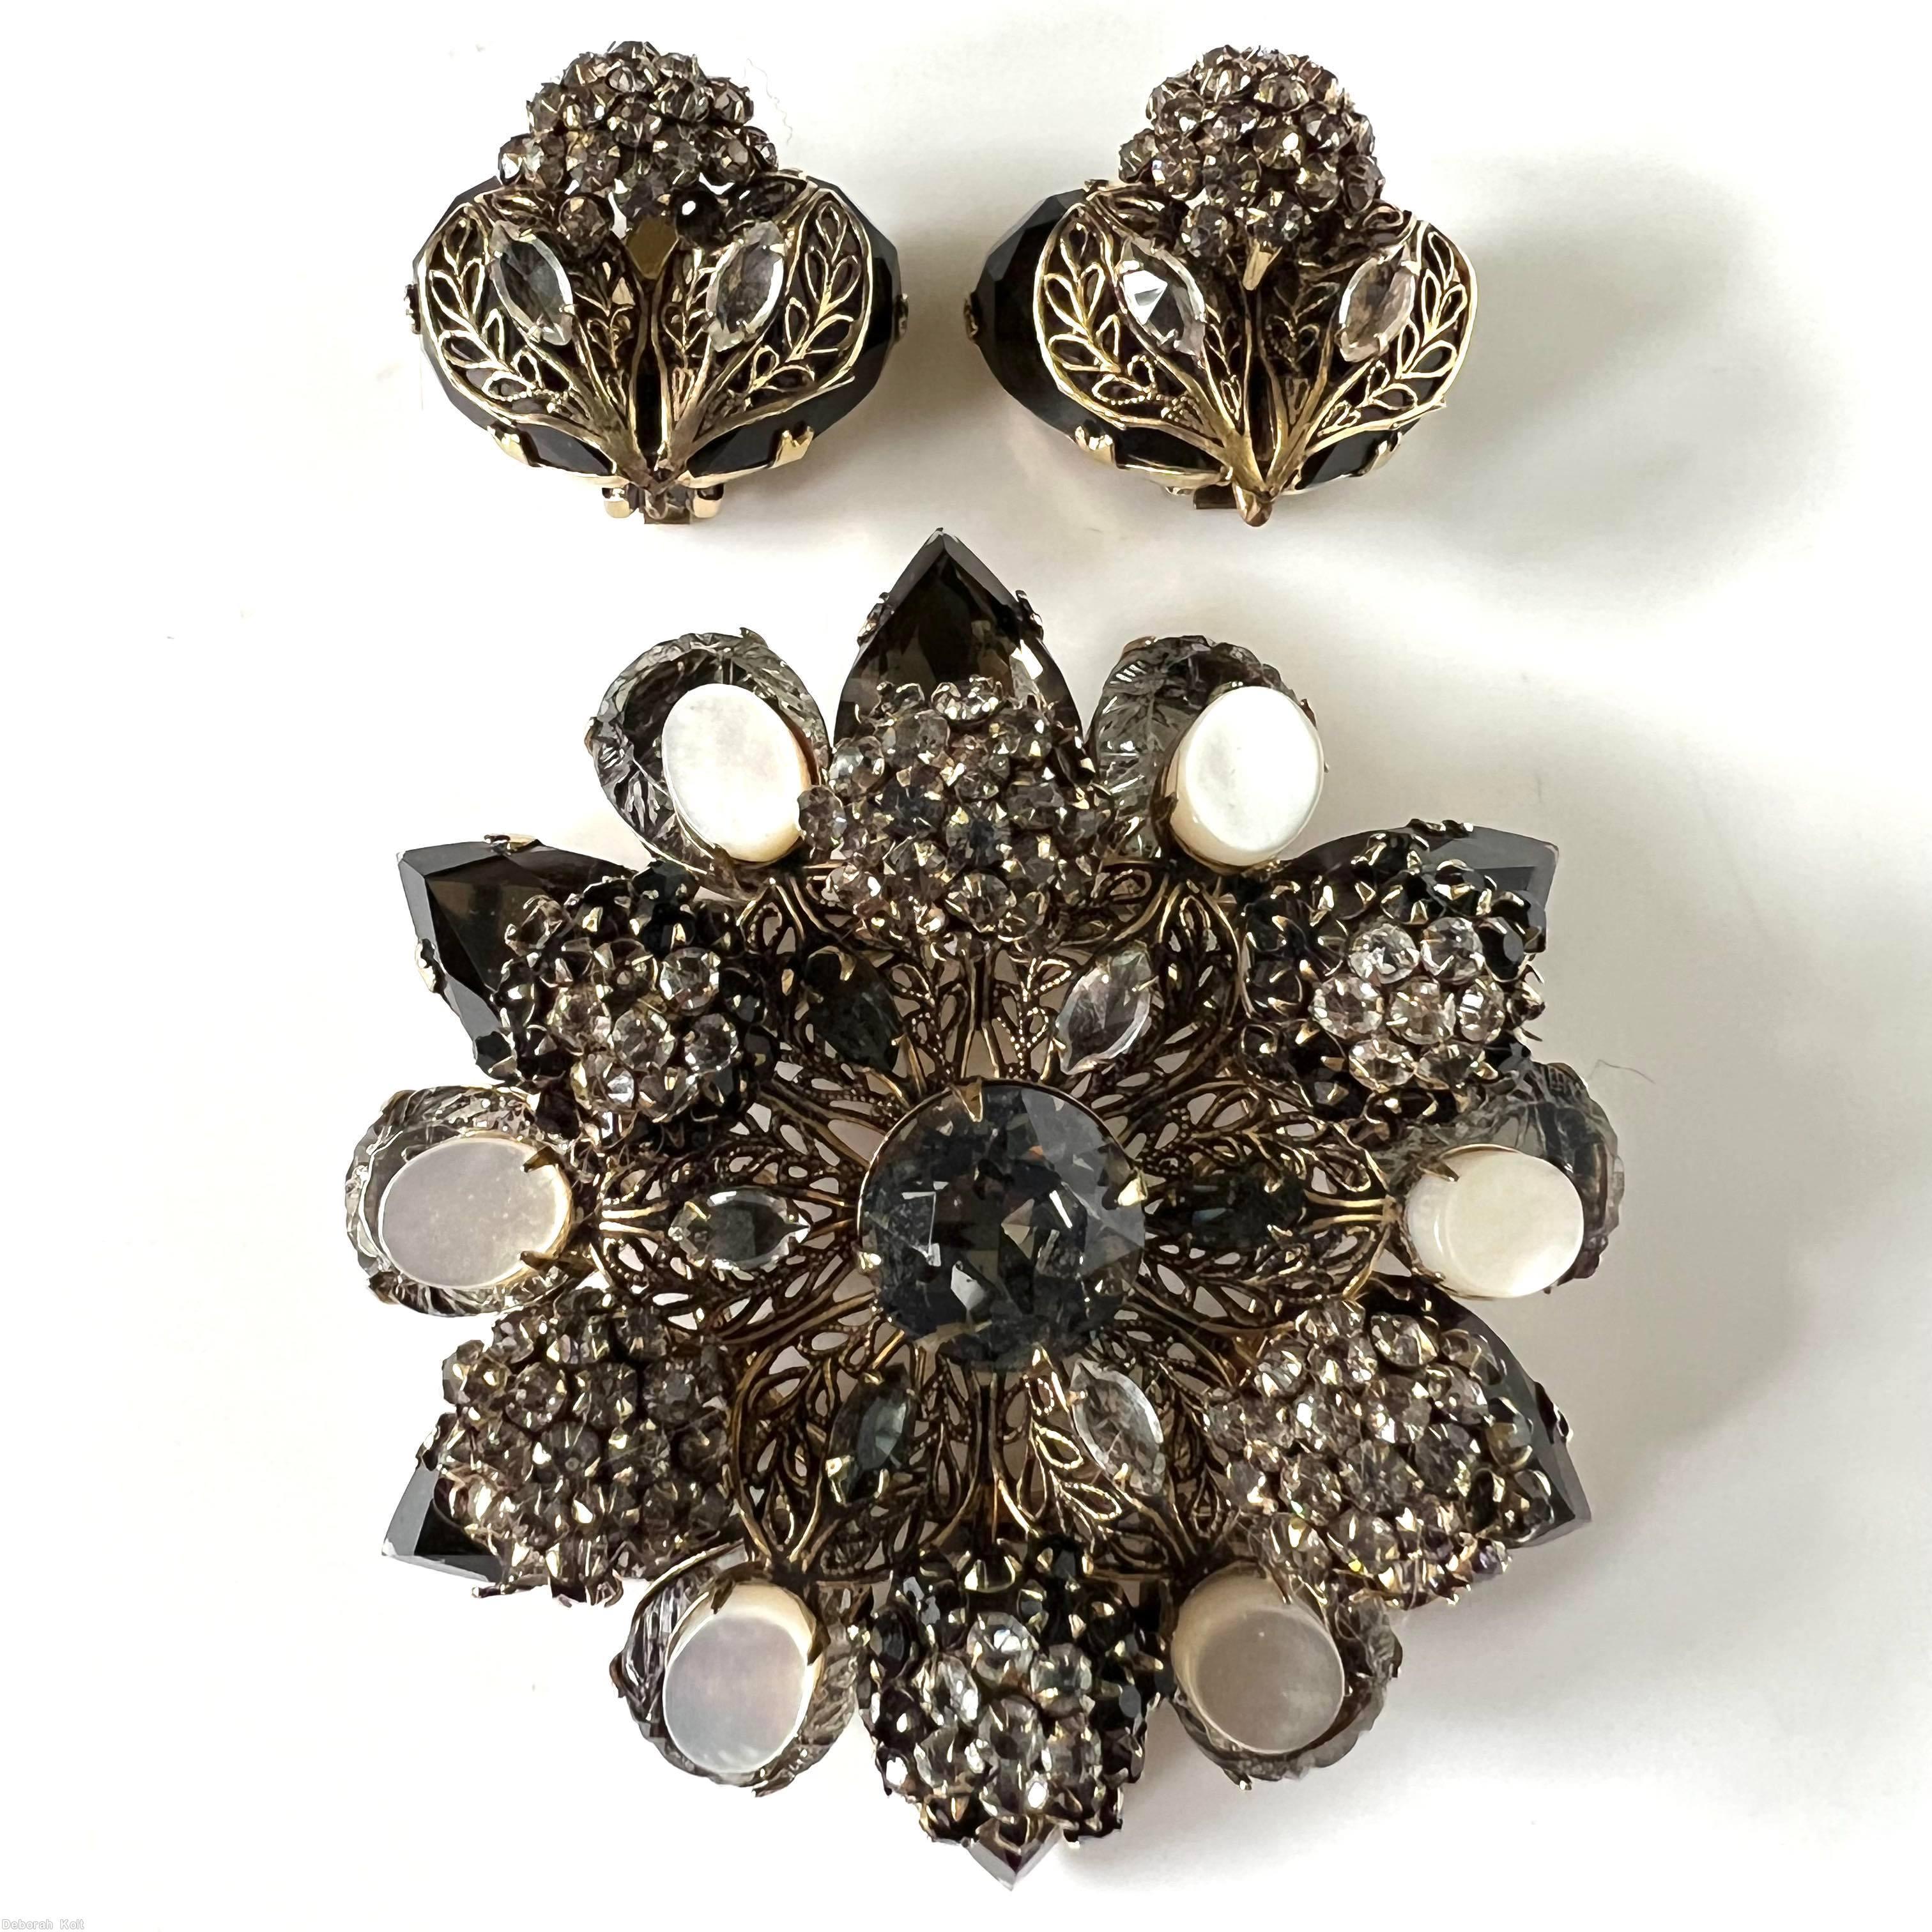 Schreiner 6 clustered ball filigree 2 level radial pin 6 large teardrop large round stone center smoky large faceted round stone center moonglow white oval cab clustered ball of smoky crystal inverted small stone jet large faceted teardrop smoky teardrop cracked ice goldtone jewelry